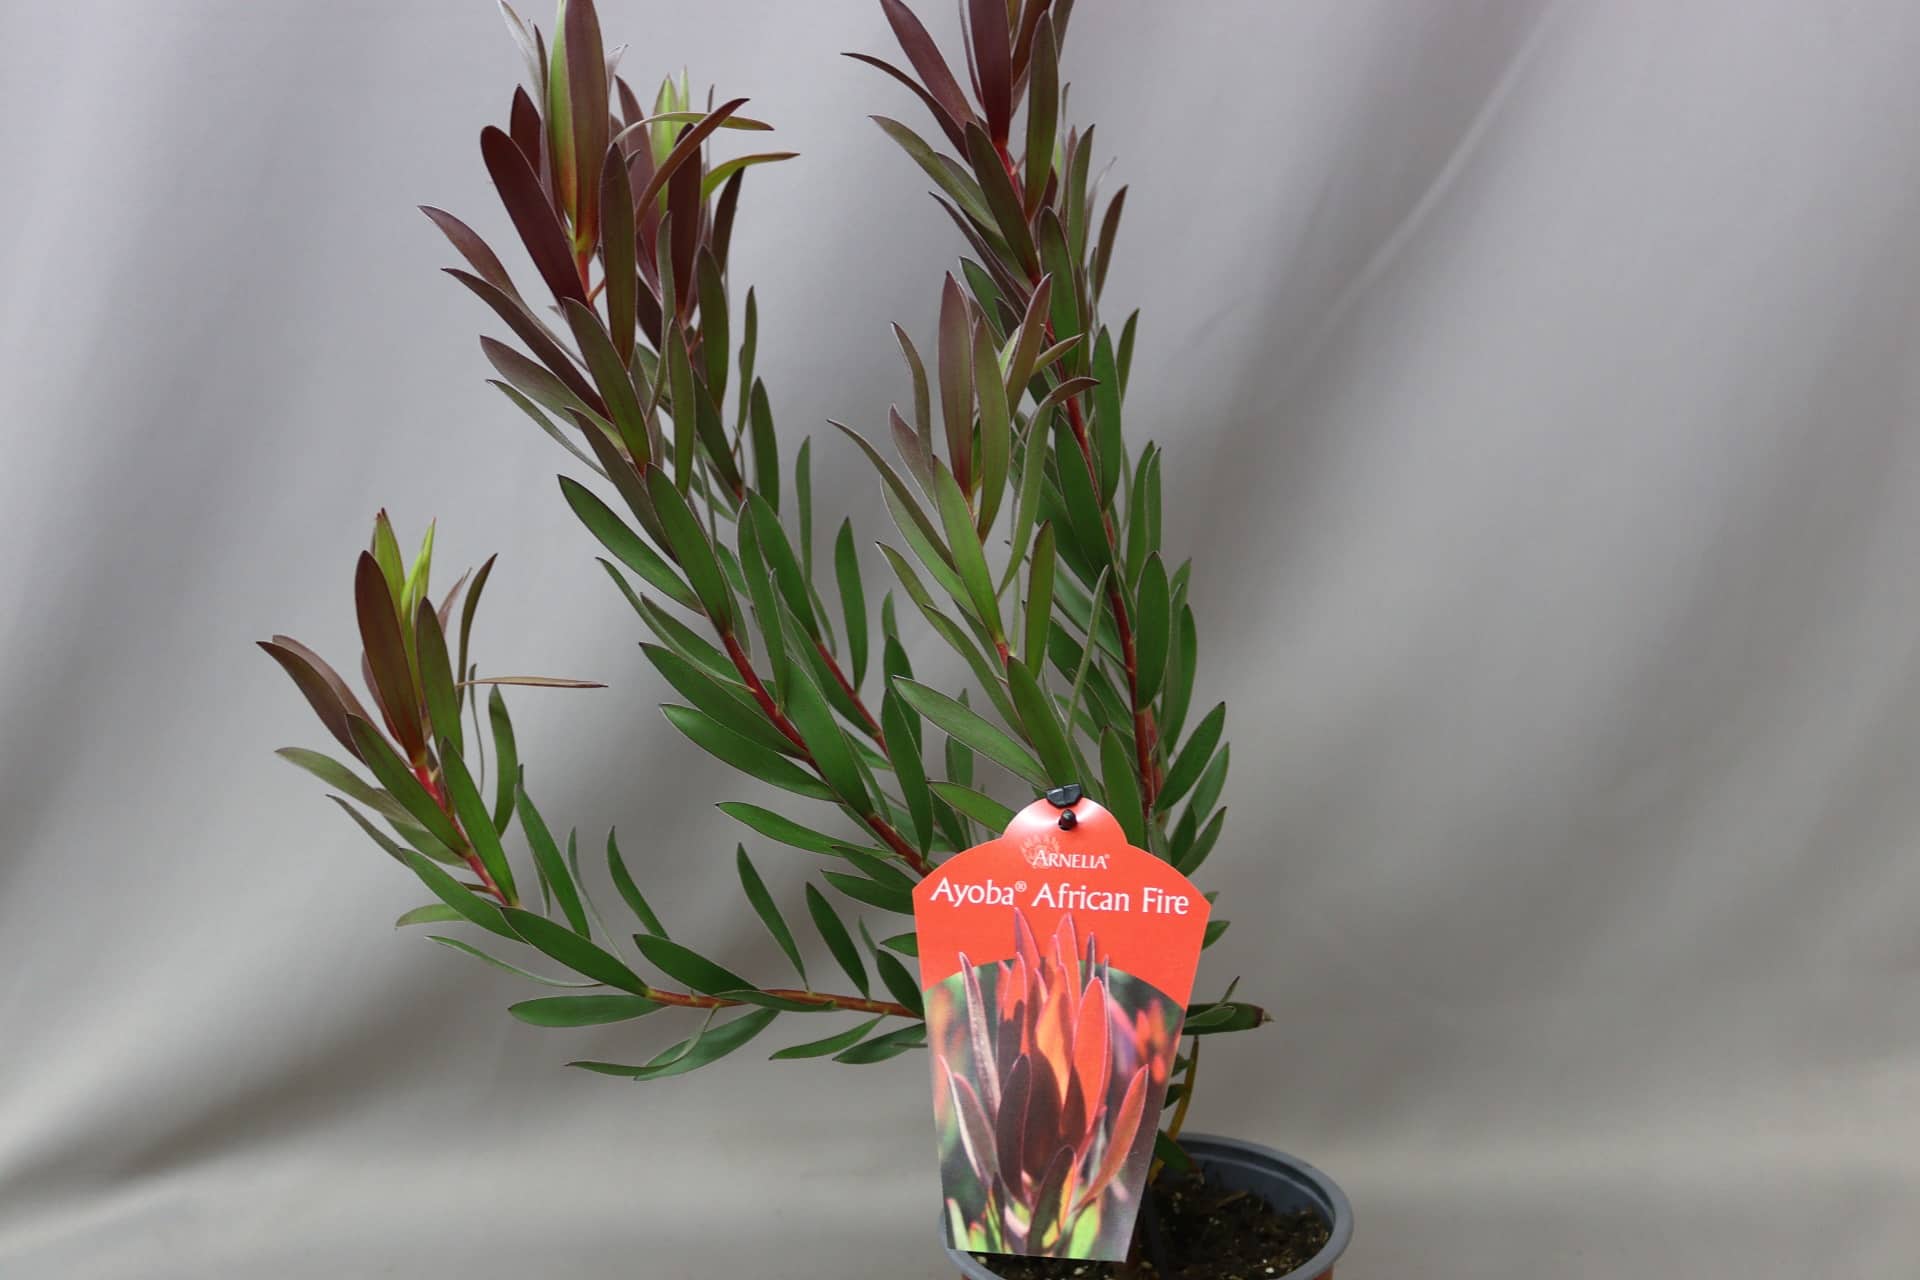 A Leucadendron Ayoba African Fire plant in a pot. The long green leaves are red-tipped.